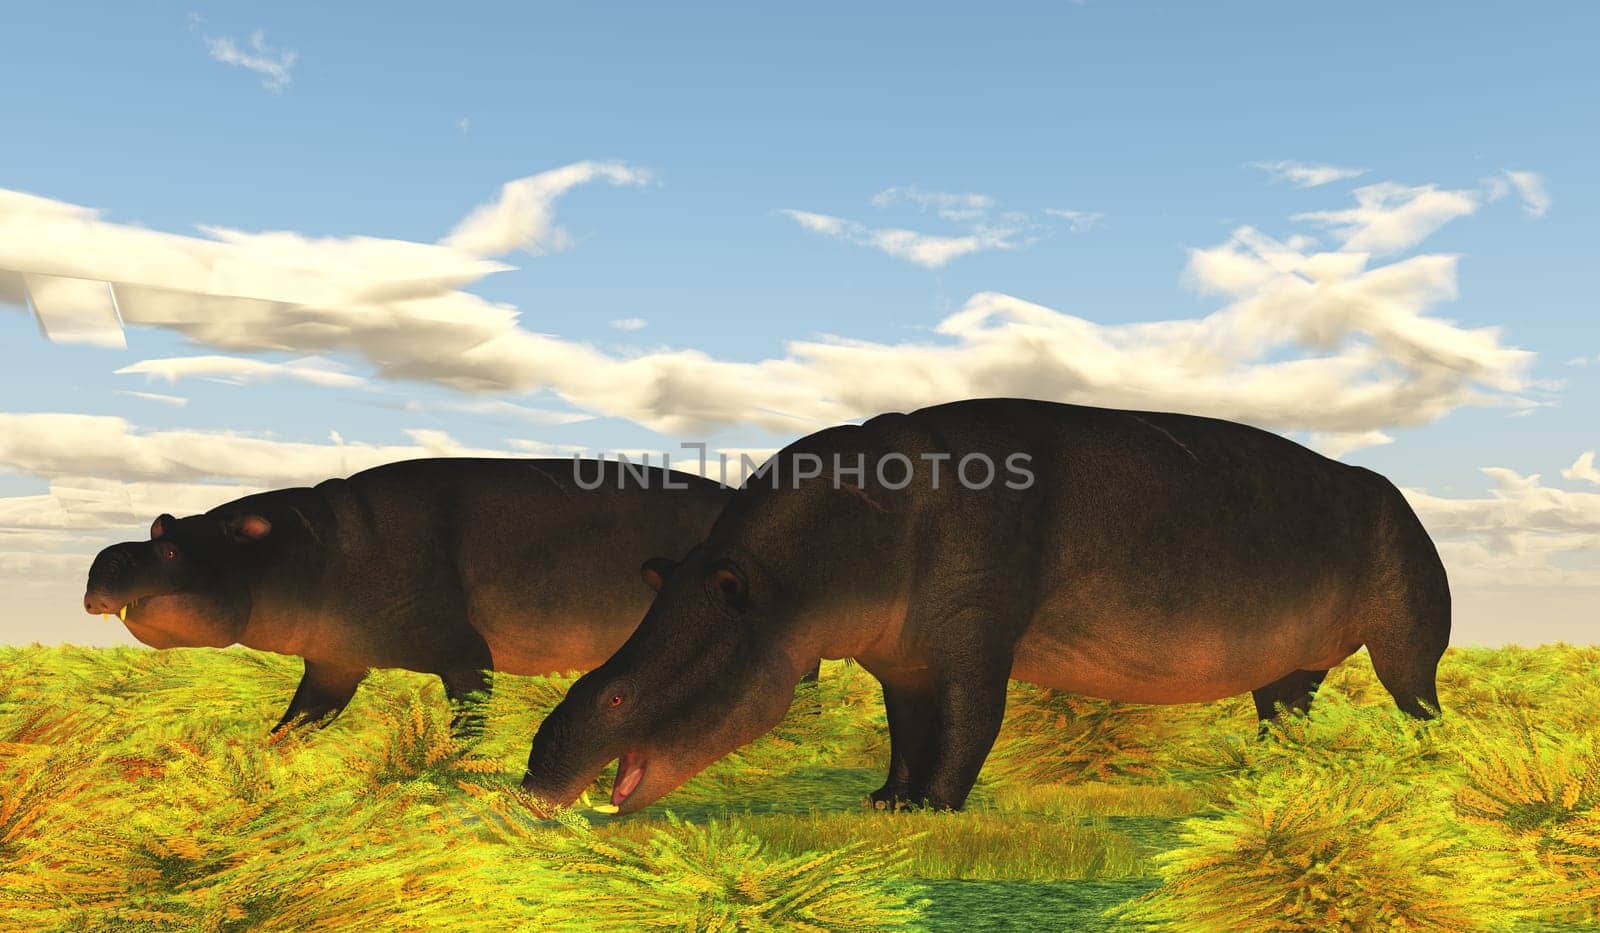 Moeritherium eating Grass by Catmando